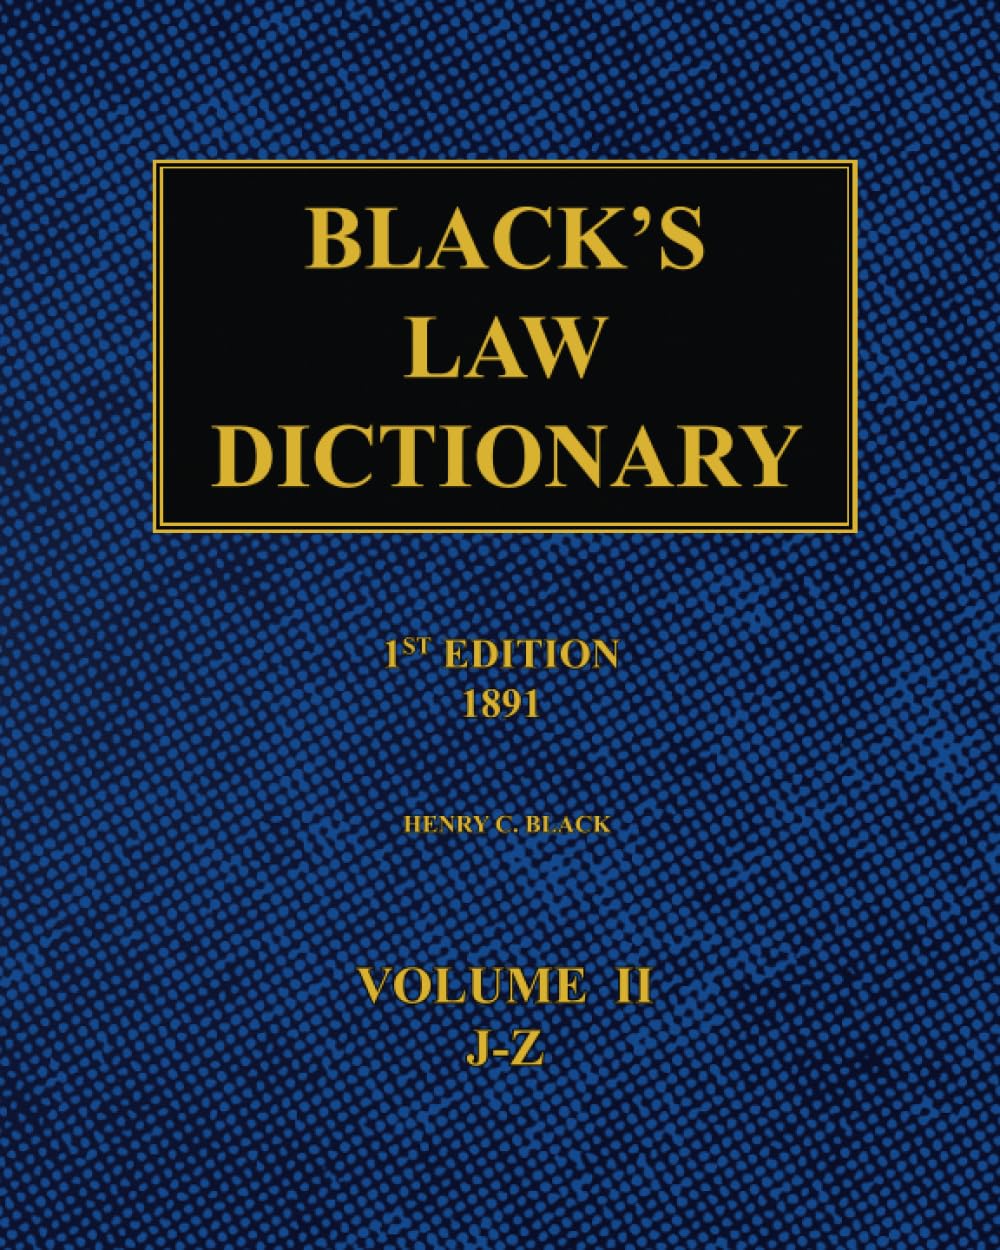 Black's Law Dictionary - 1st Edition (1891): Volume 2